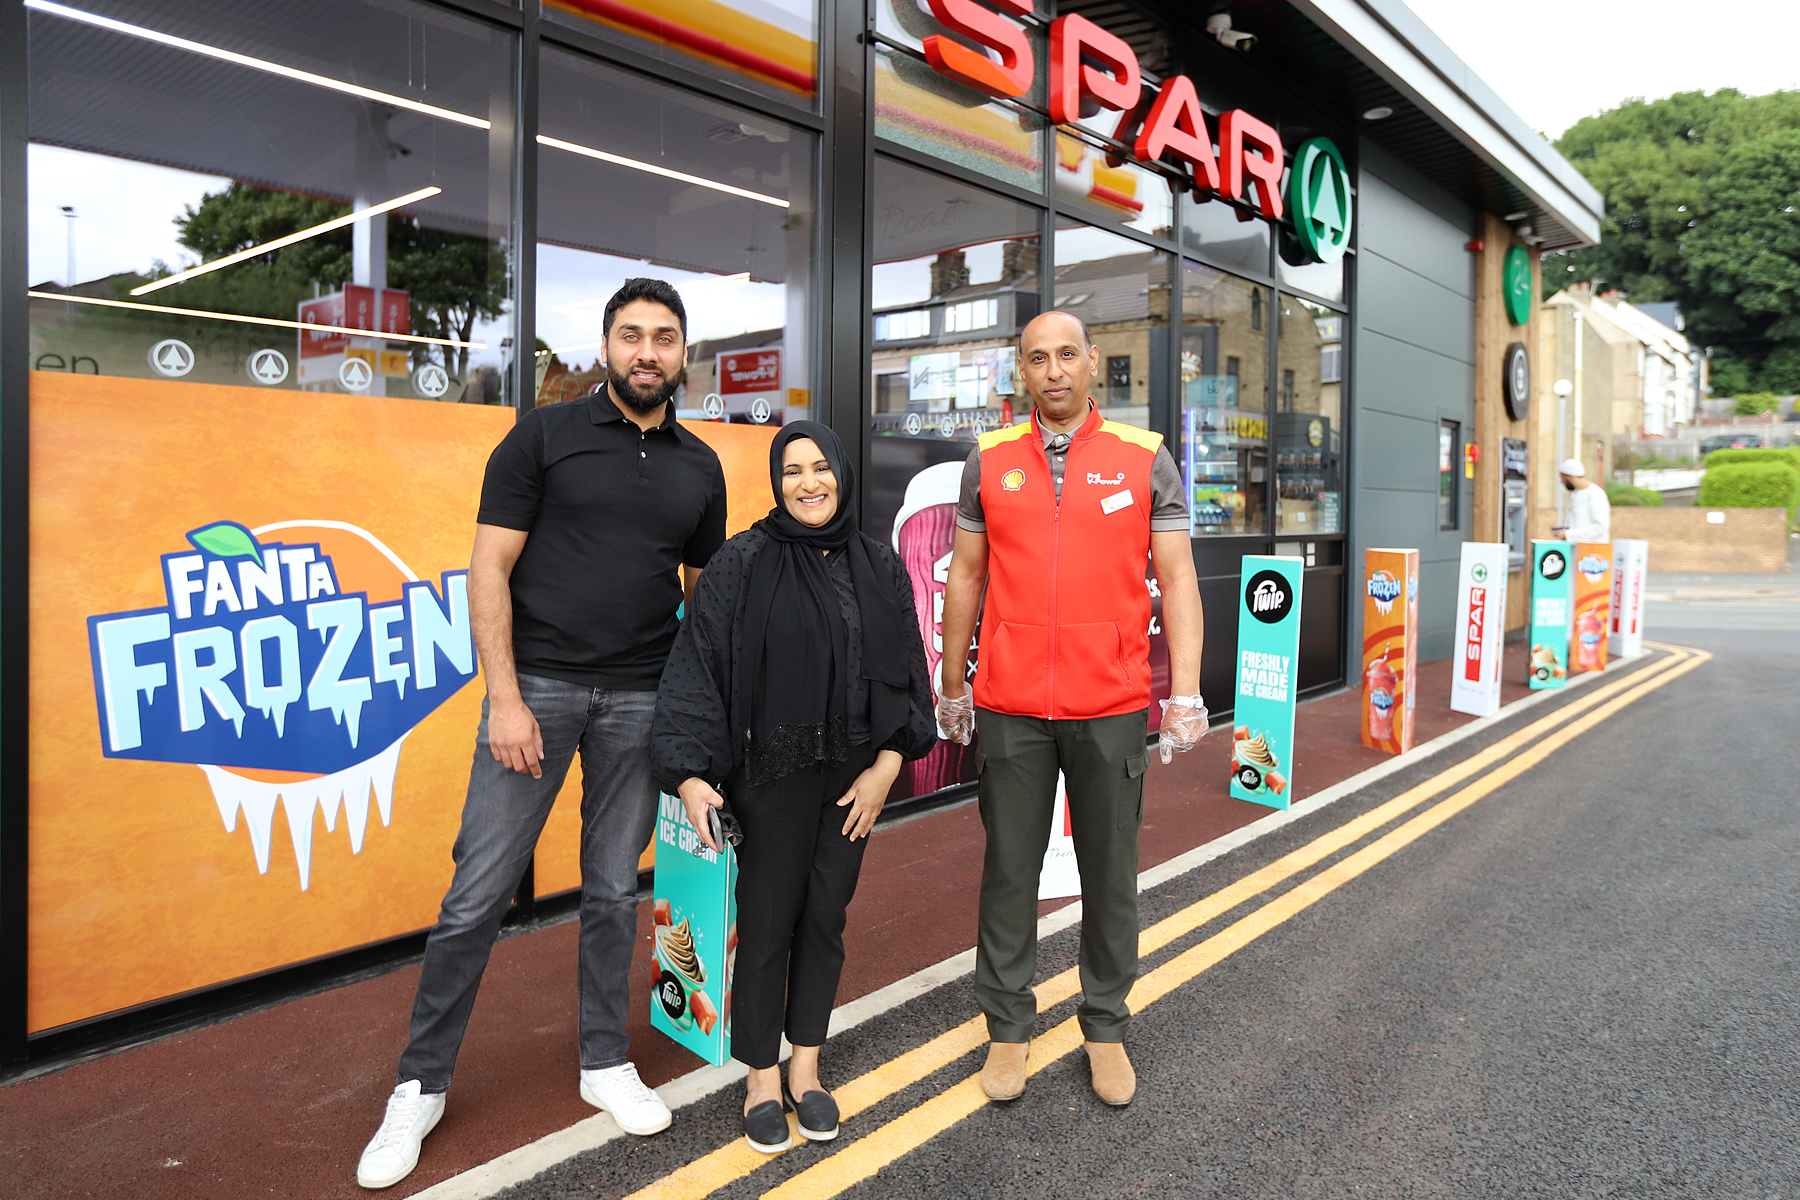 Growing forecourt operator opens two new SPAR stores after £2m investment